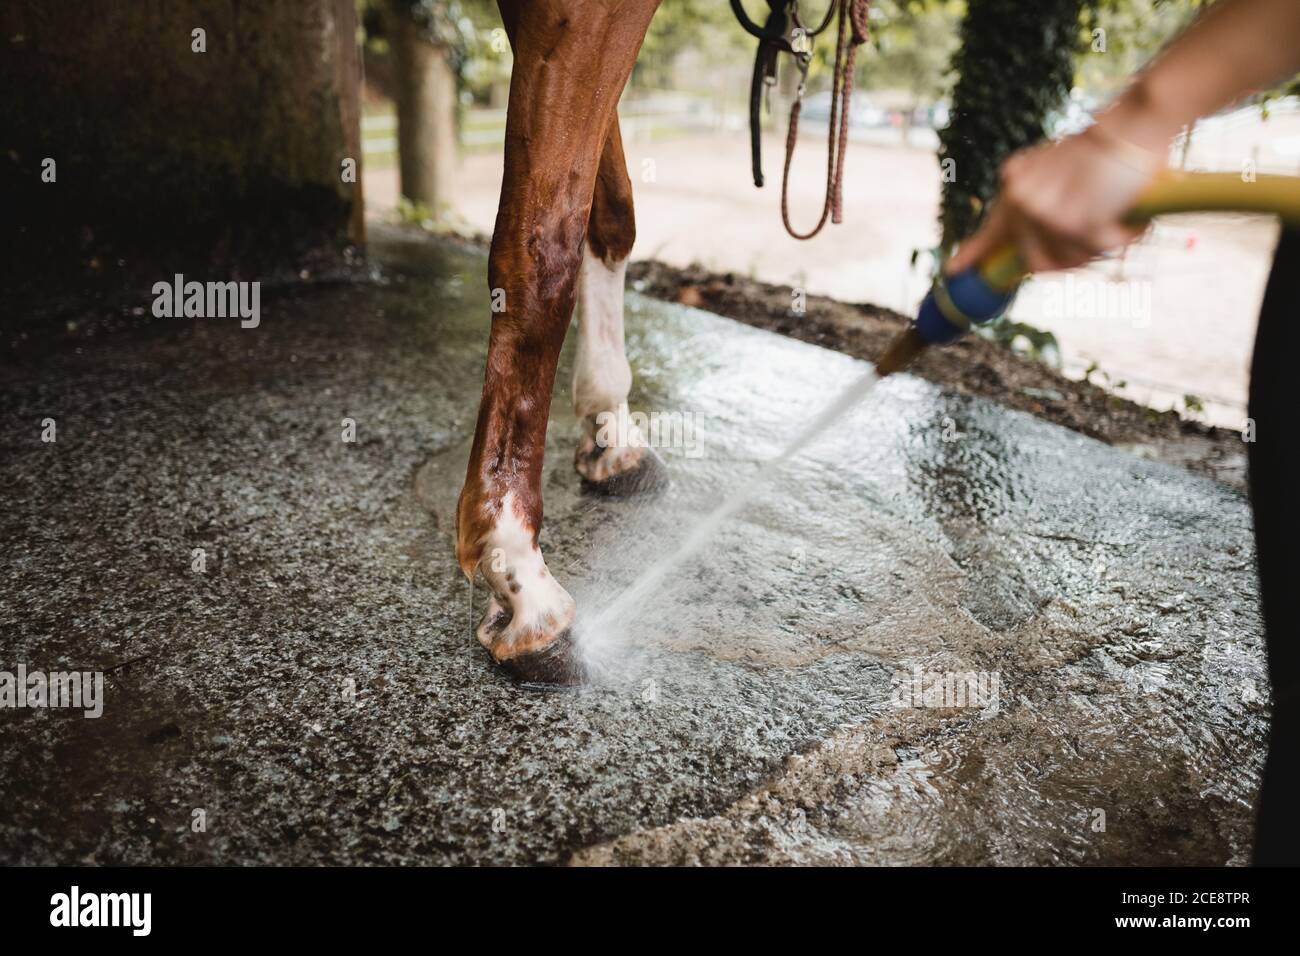 Cropped view of unrecognizable jockey in riding boots and hat standing in stable and washing horse from hose Stock Photo